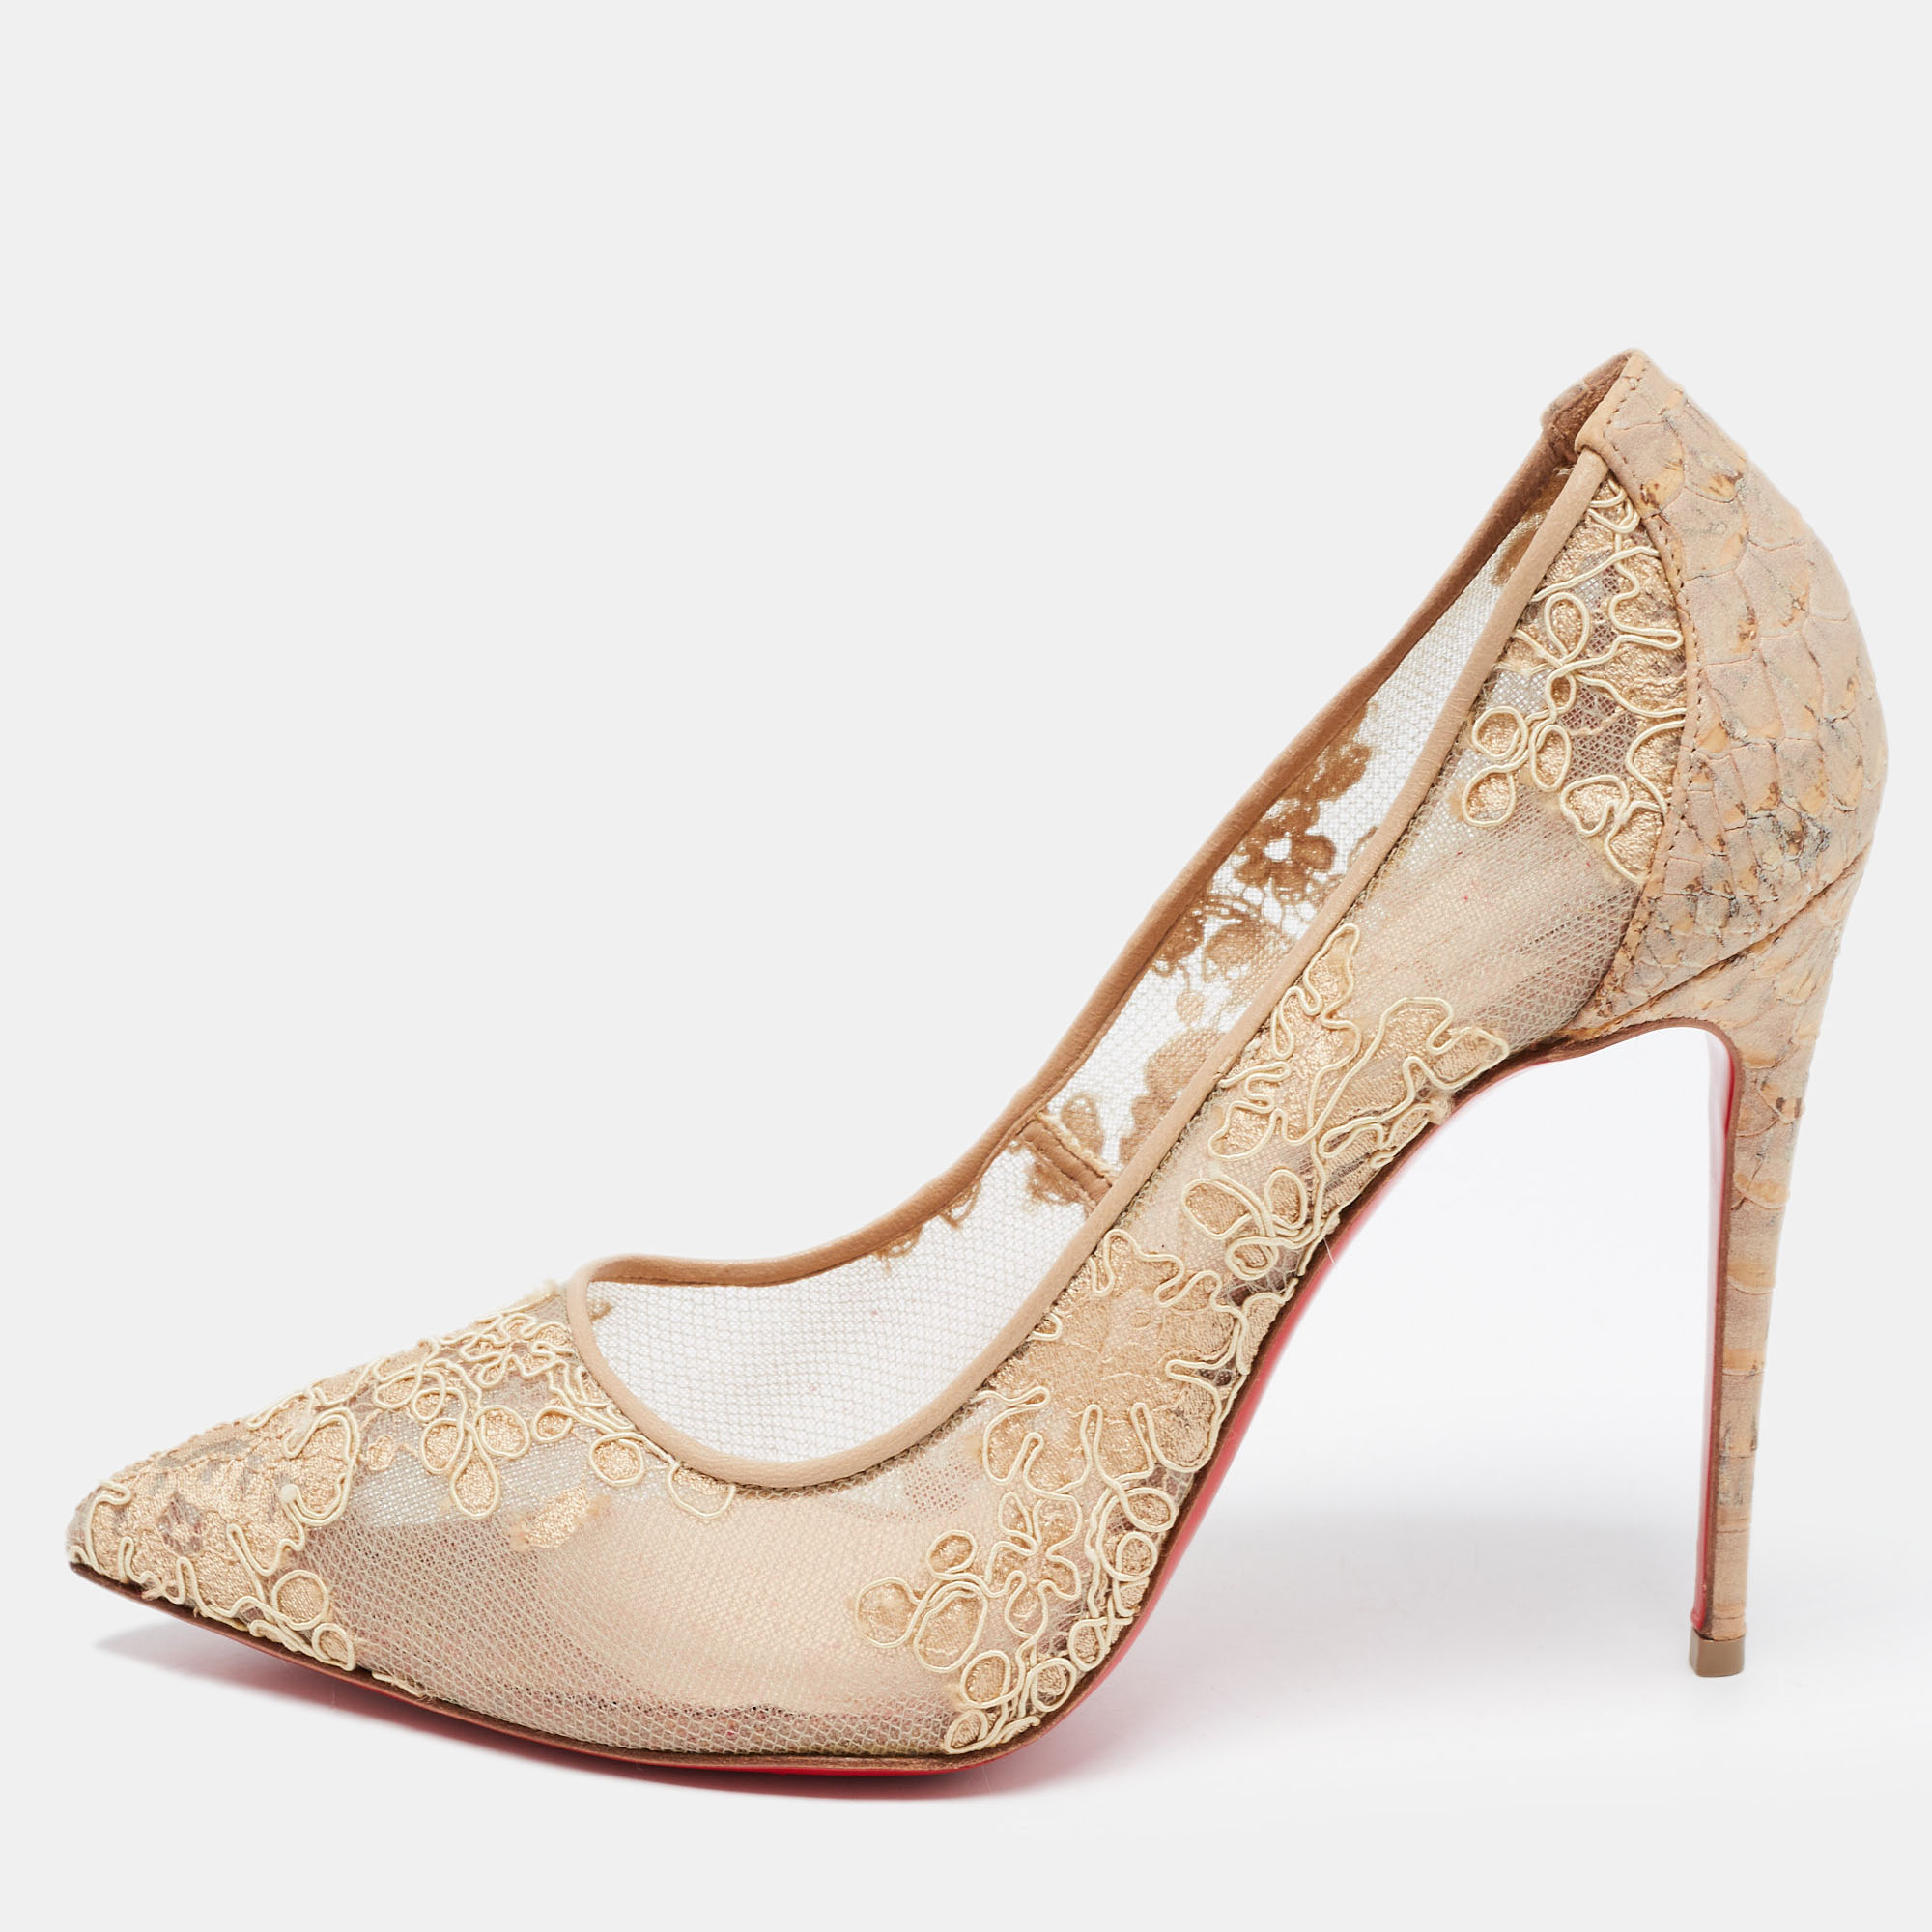 Christian Louboutin Beige Lace And Embossed Python Leather Pigalle Follies Pumps Size 38